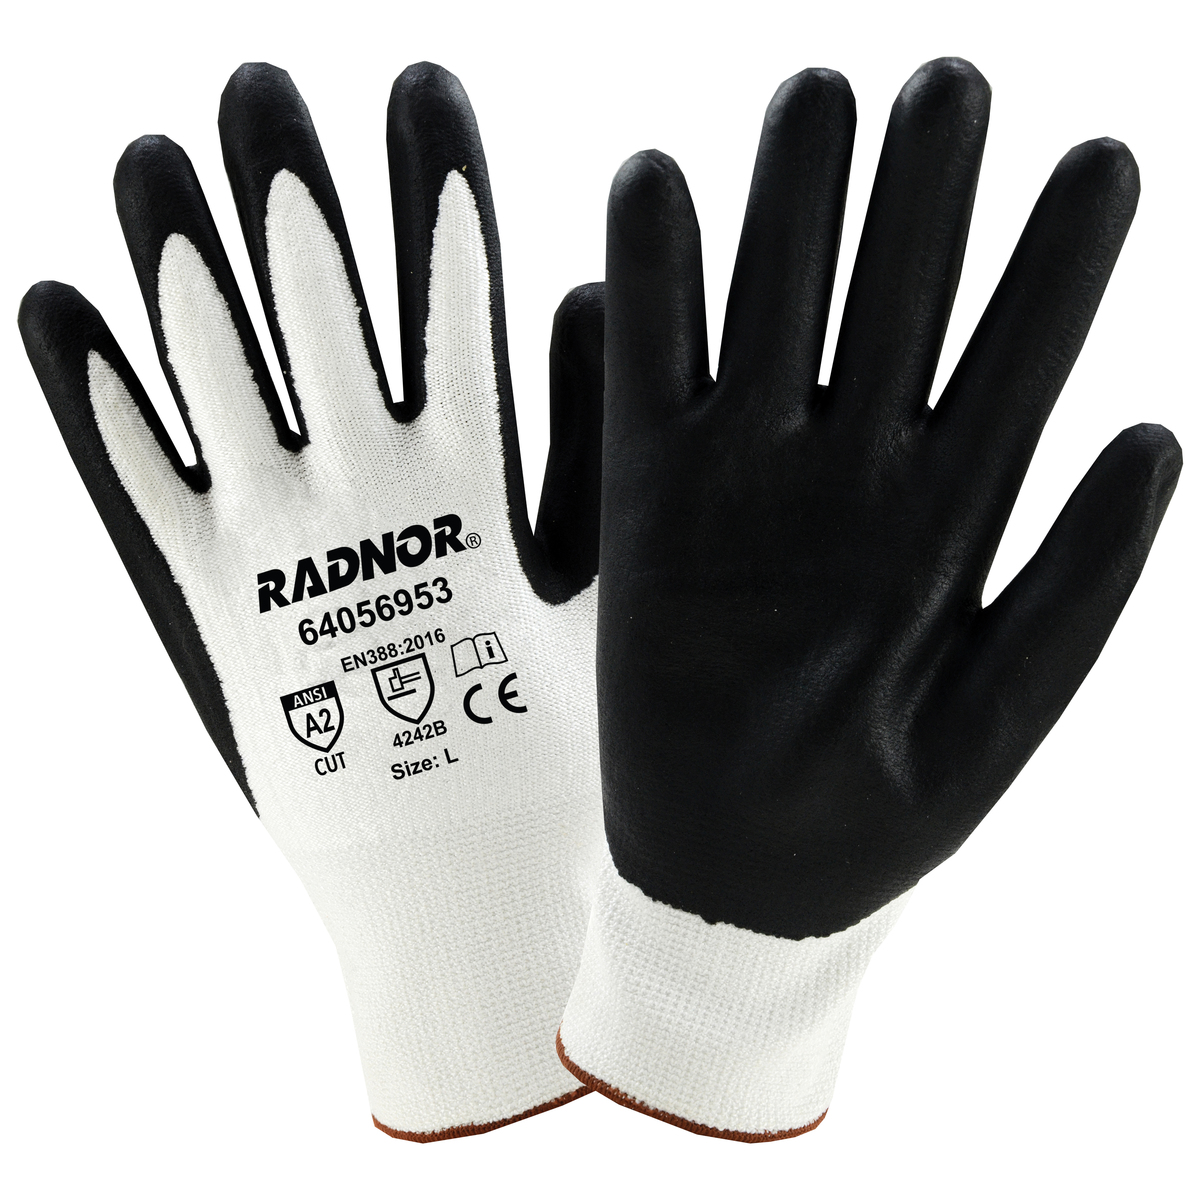 RADNOR® 2X 13 Gauge High Performance Polyethylene And Nylon Cut Resistant Gloves With Foam Nitrile Coated Palm And Fingertips